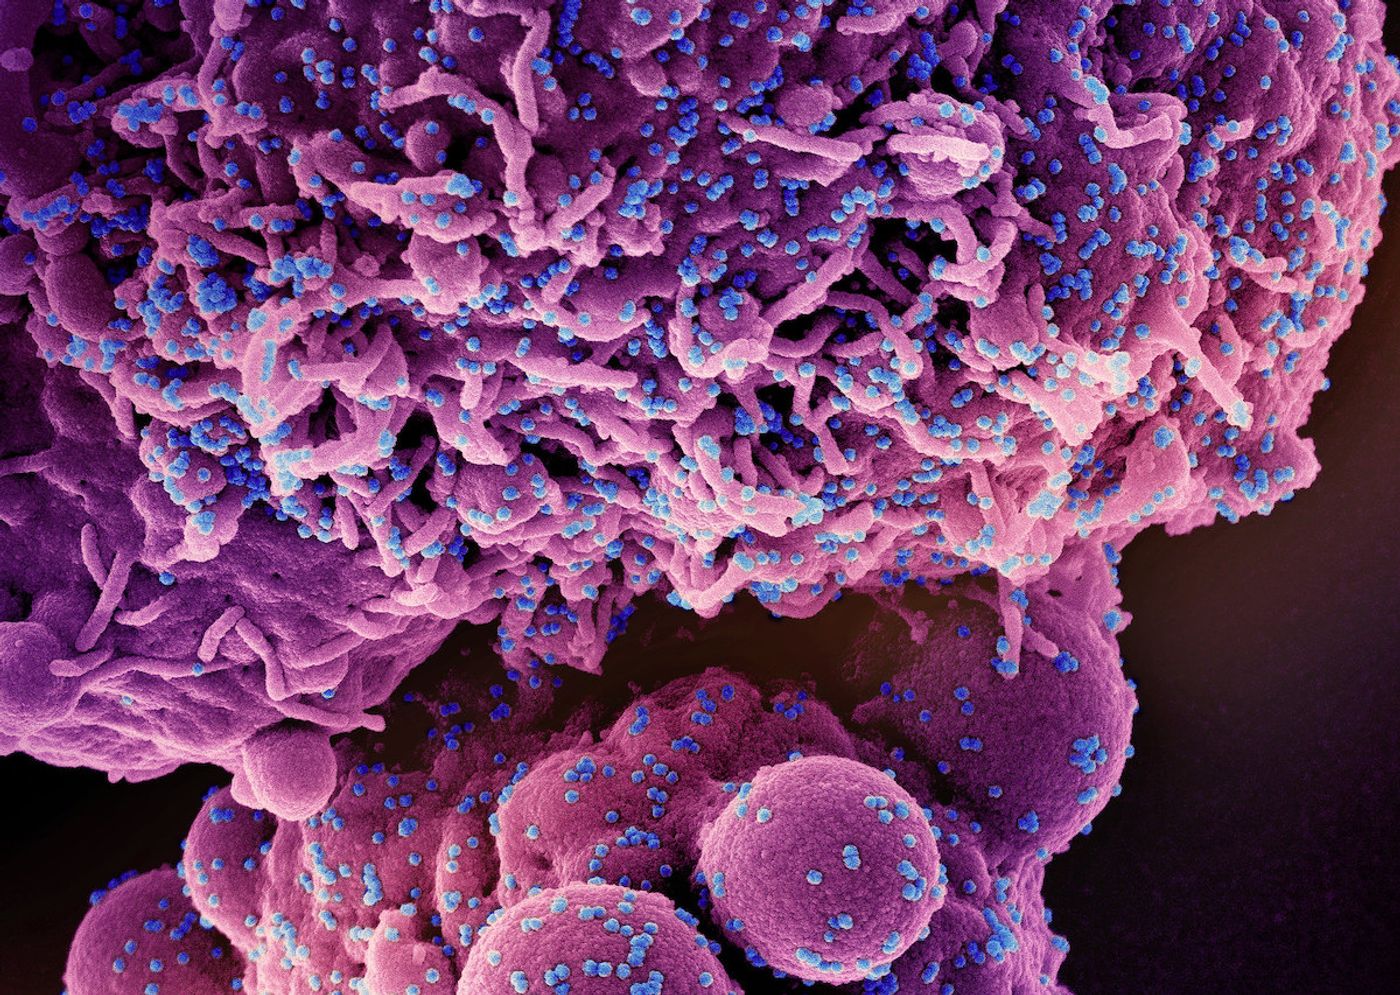 Colorized scanning electron micrograph of a cell (purple) infected with the Omicron strain of SARS-CoV-2 virus particles (blue), isolated from a patient sample. Image captured at the NIAID Integrated Research Facility (IRF) in Fort Detrick, Maryland. Credit: NIAID